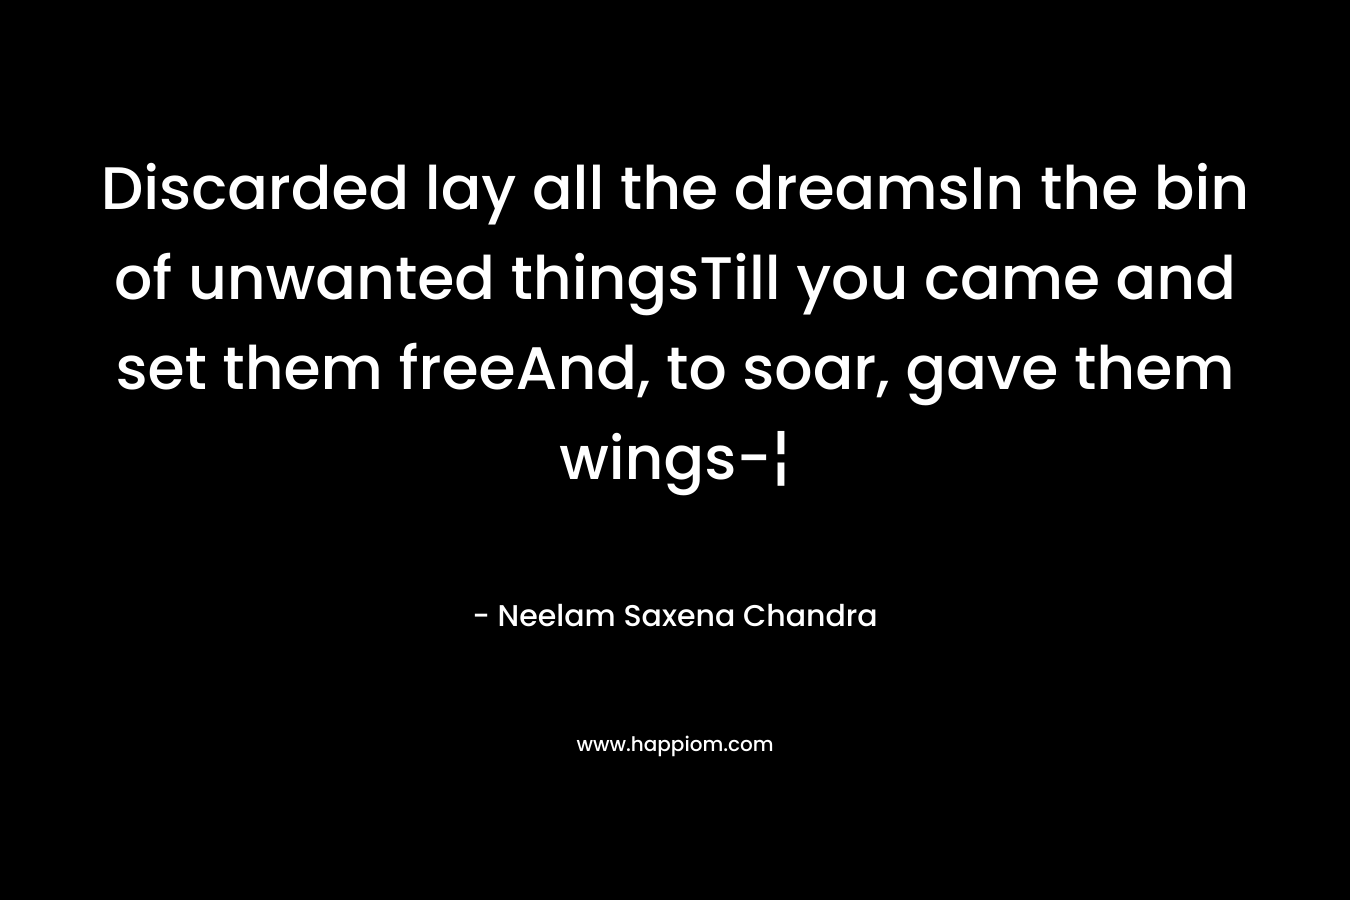 Discarded lay all the dreamsIn the bin of unwanted thingsTill you came and set them freeAnd, to soar, gave them wings-¦